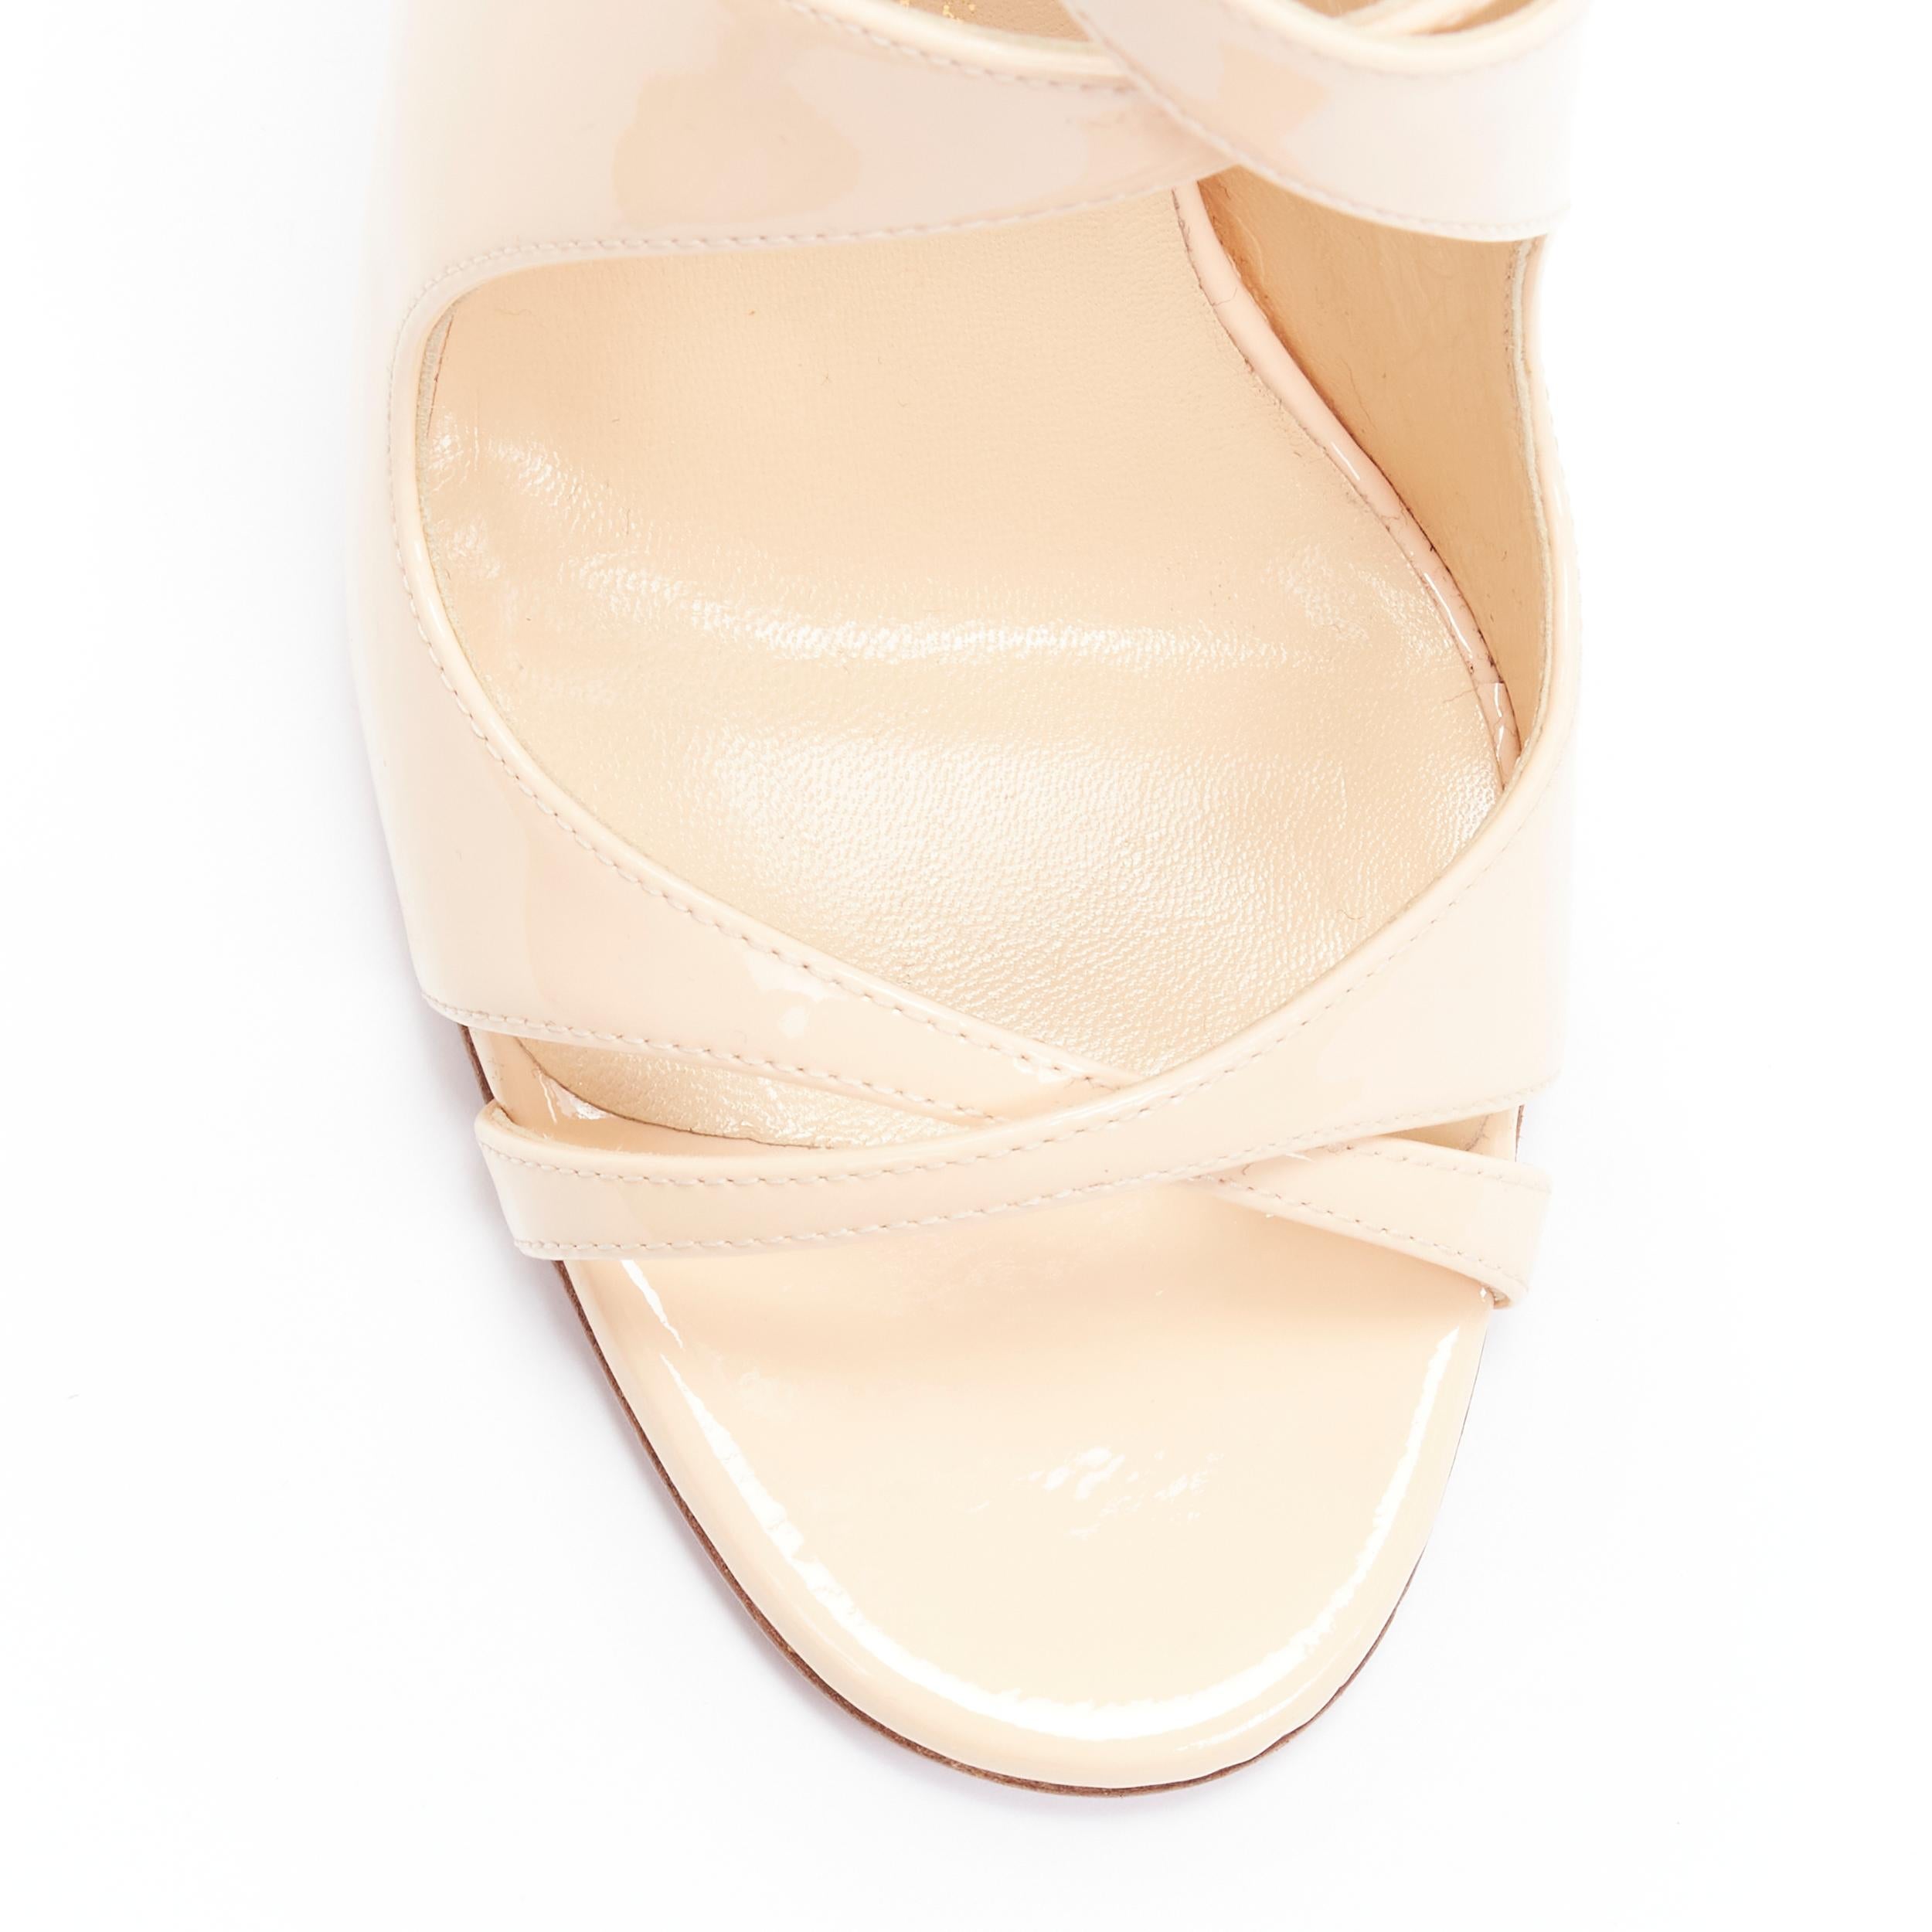 White new CHRISTIAN LOUBOUTIN Malefissima 110 nude patent cross strappy sandals EU37.5 For Sale